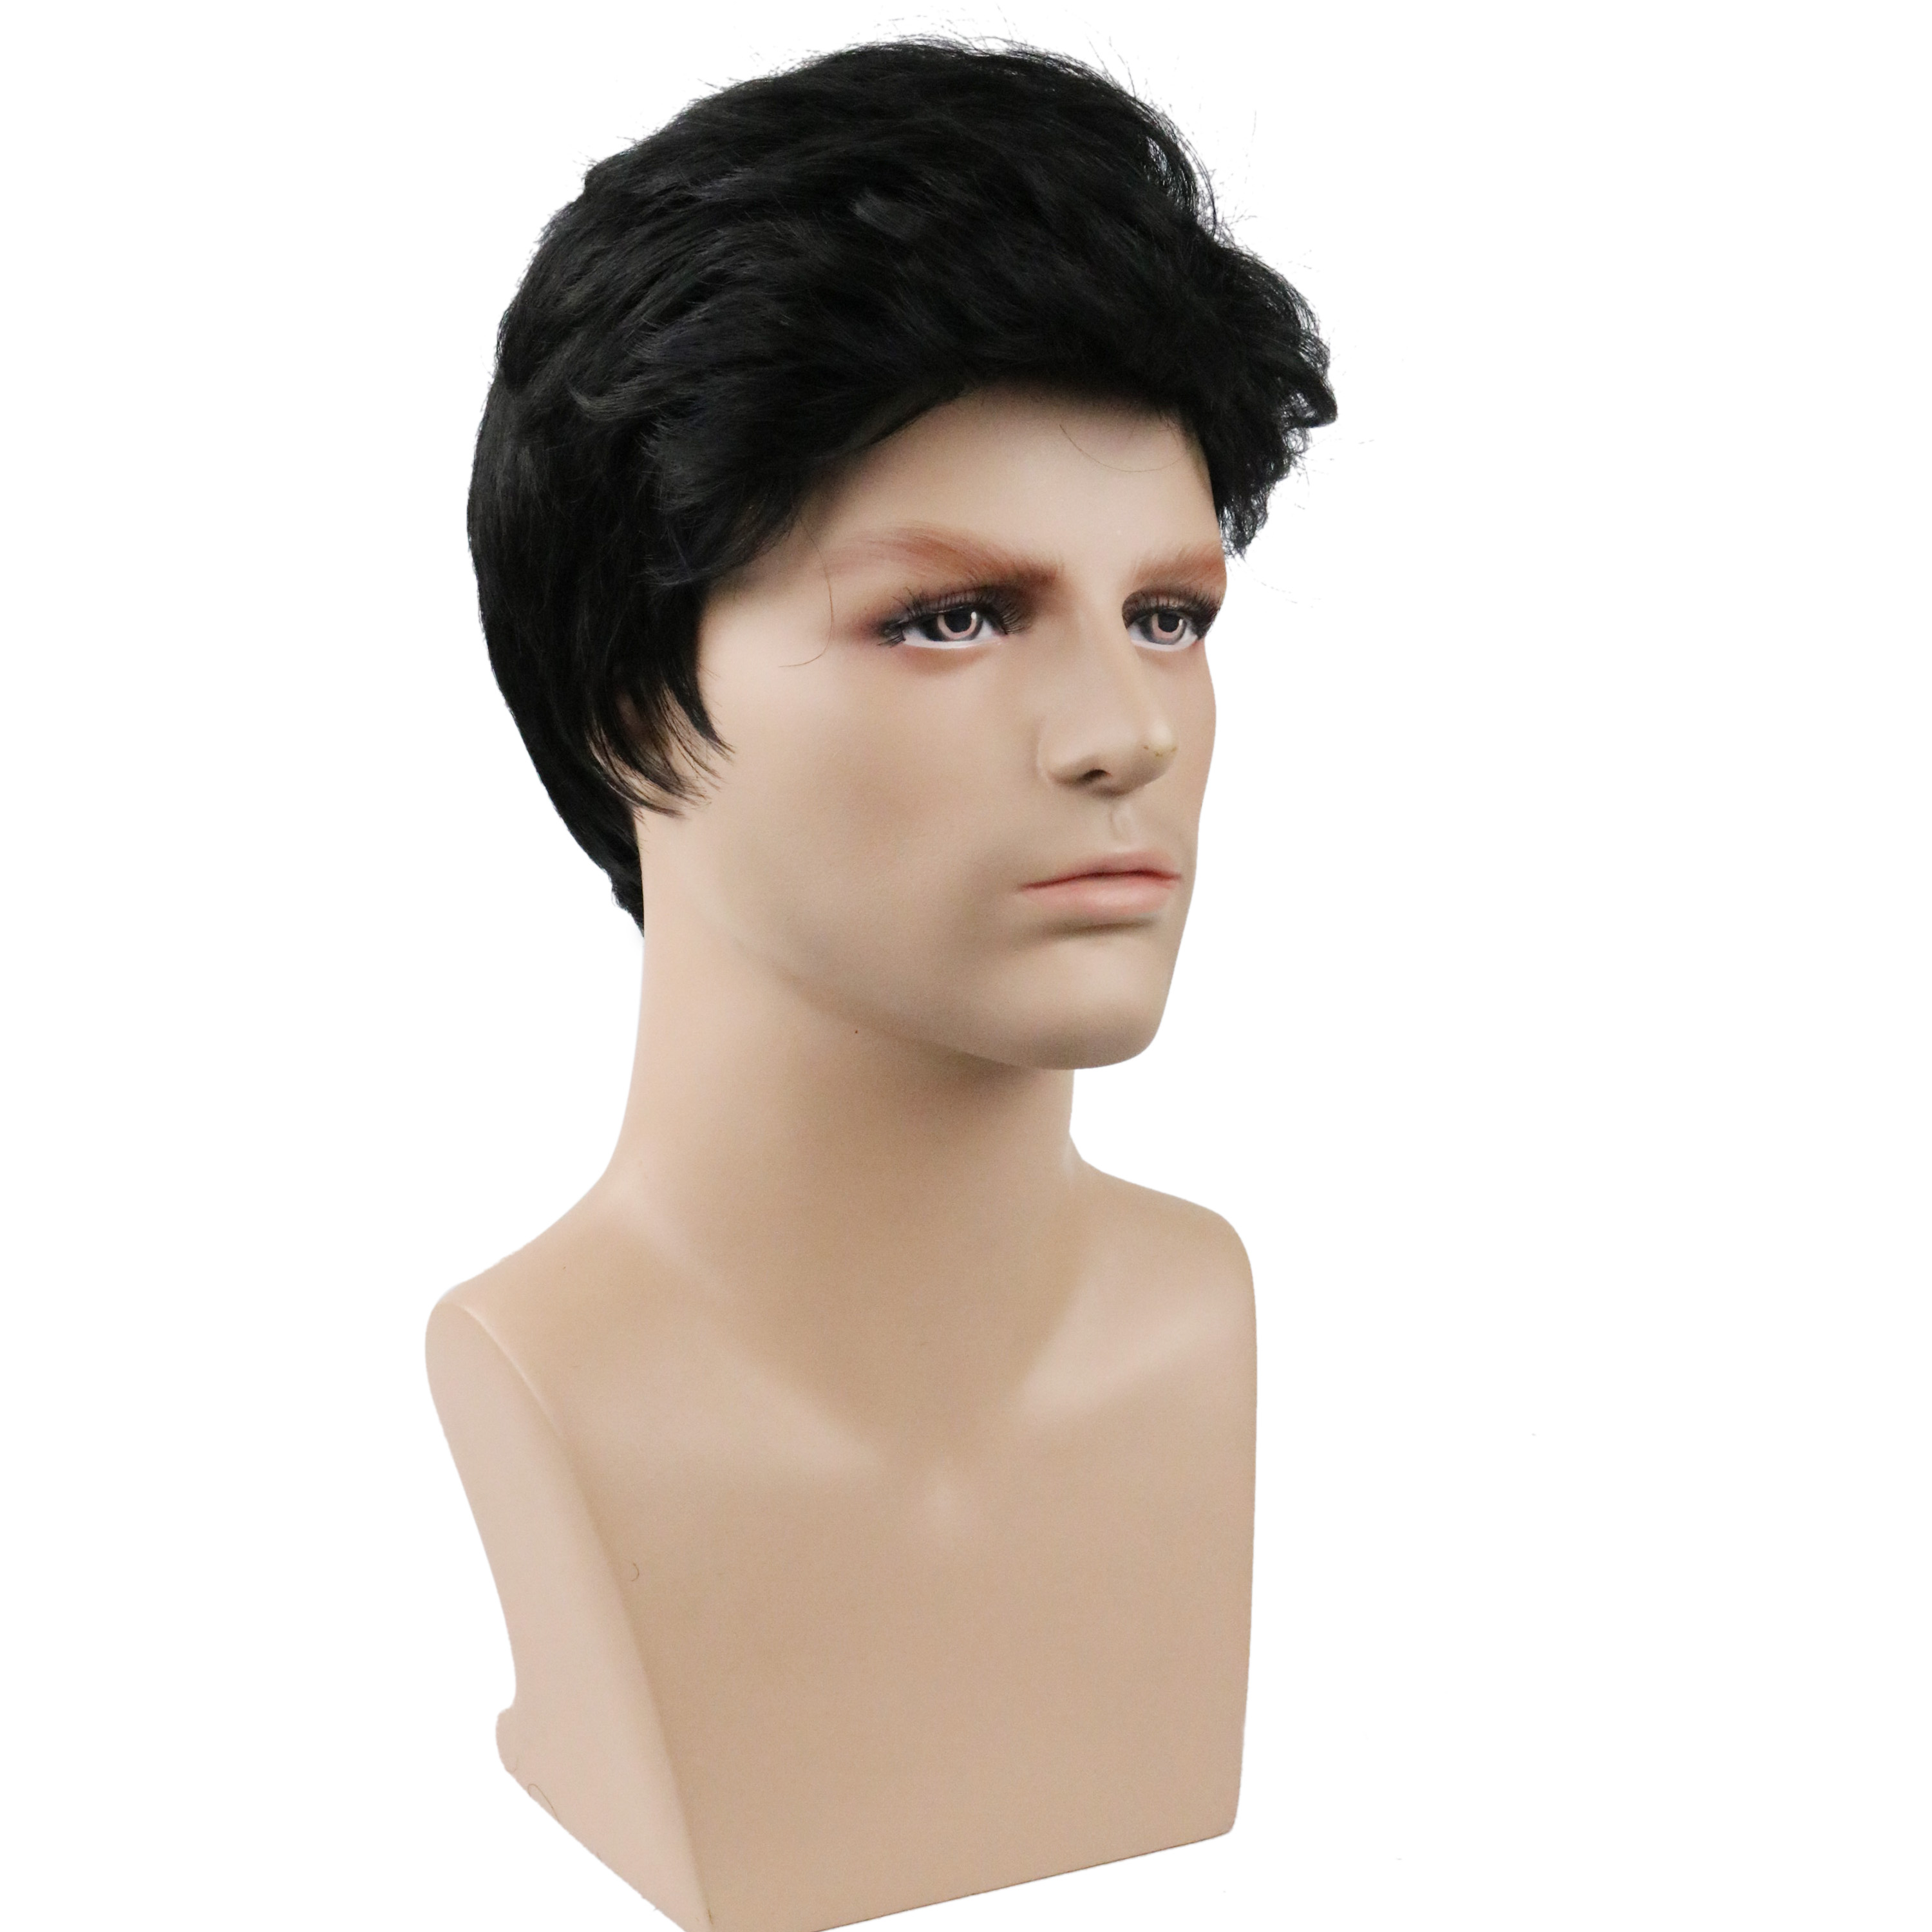 Men’s Wig Black Natural Looking ShortSynthetic Hair Capless Wigs 8 inch